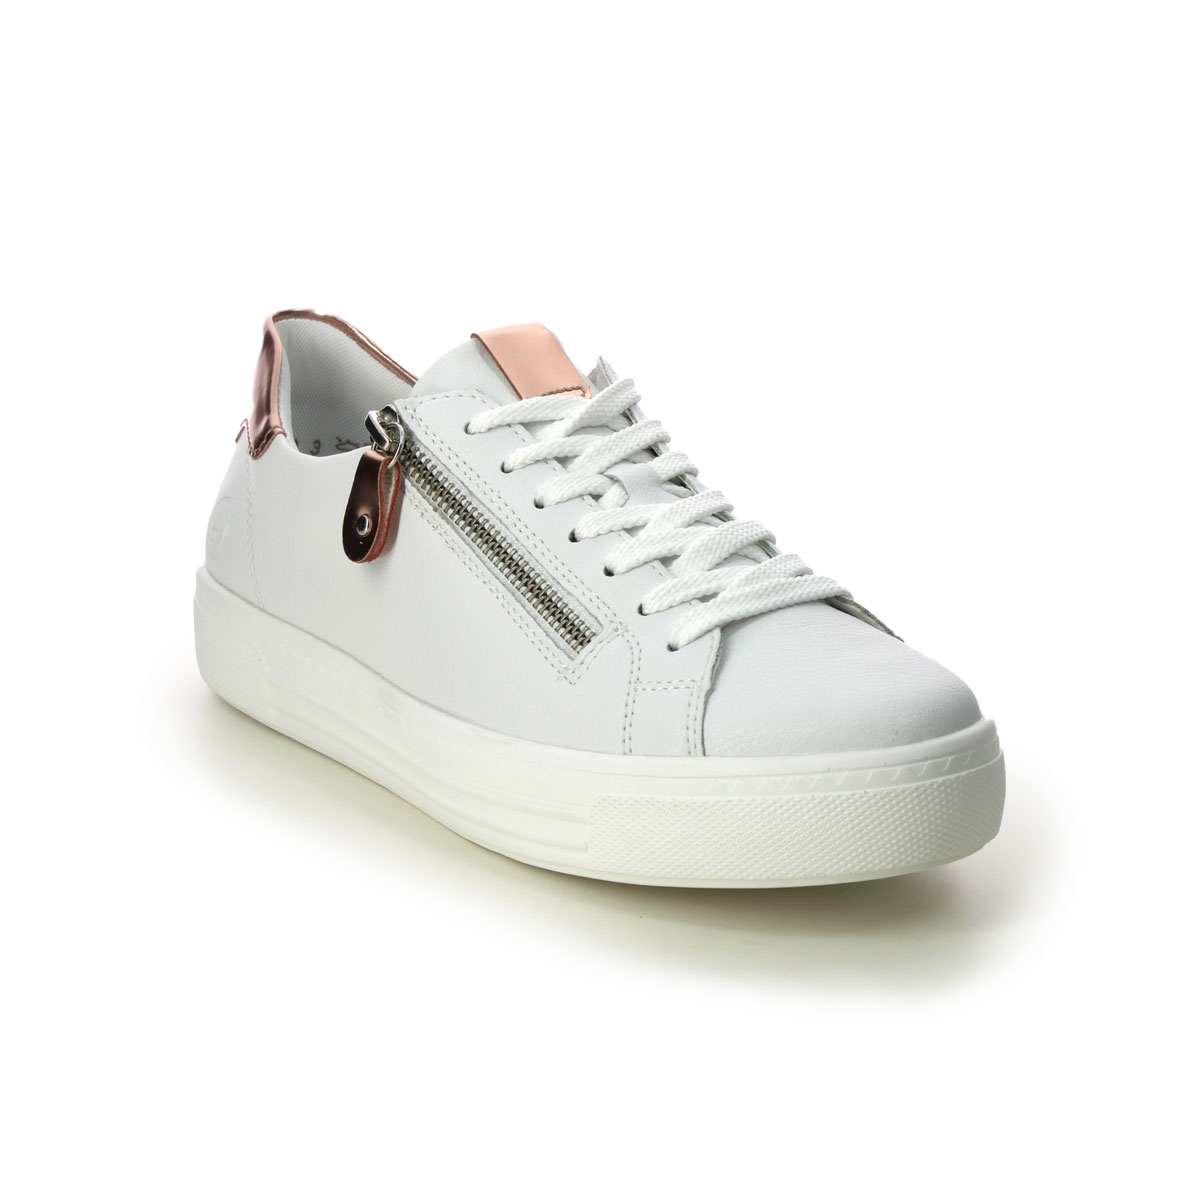 Remonte D0903-81 Altozip White Rose gold Womens trainers in a Plain Leather in Size 36